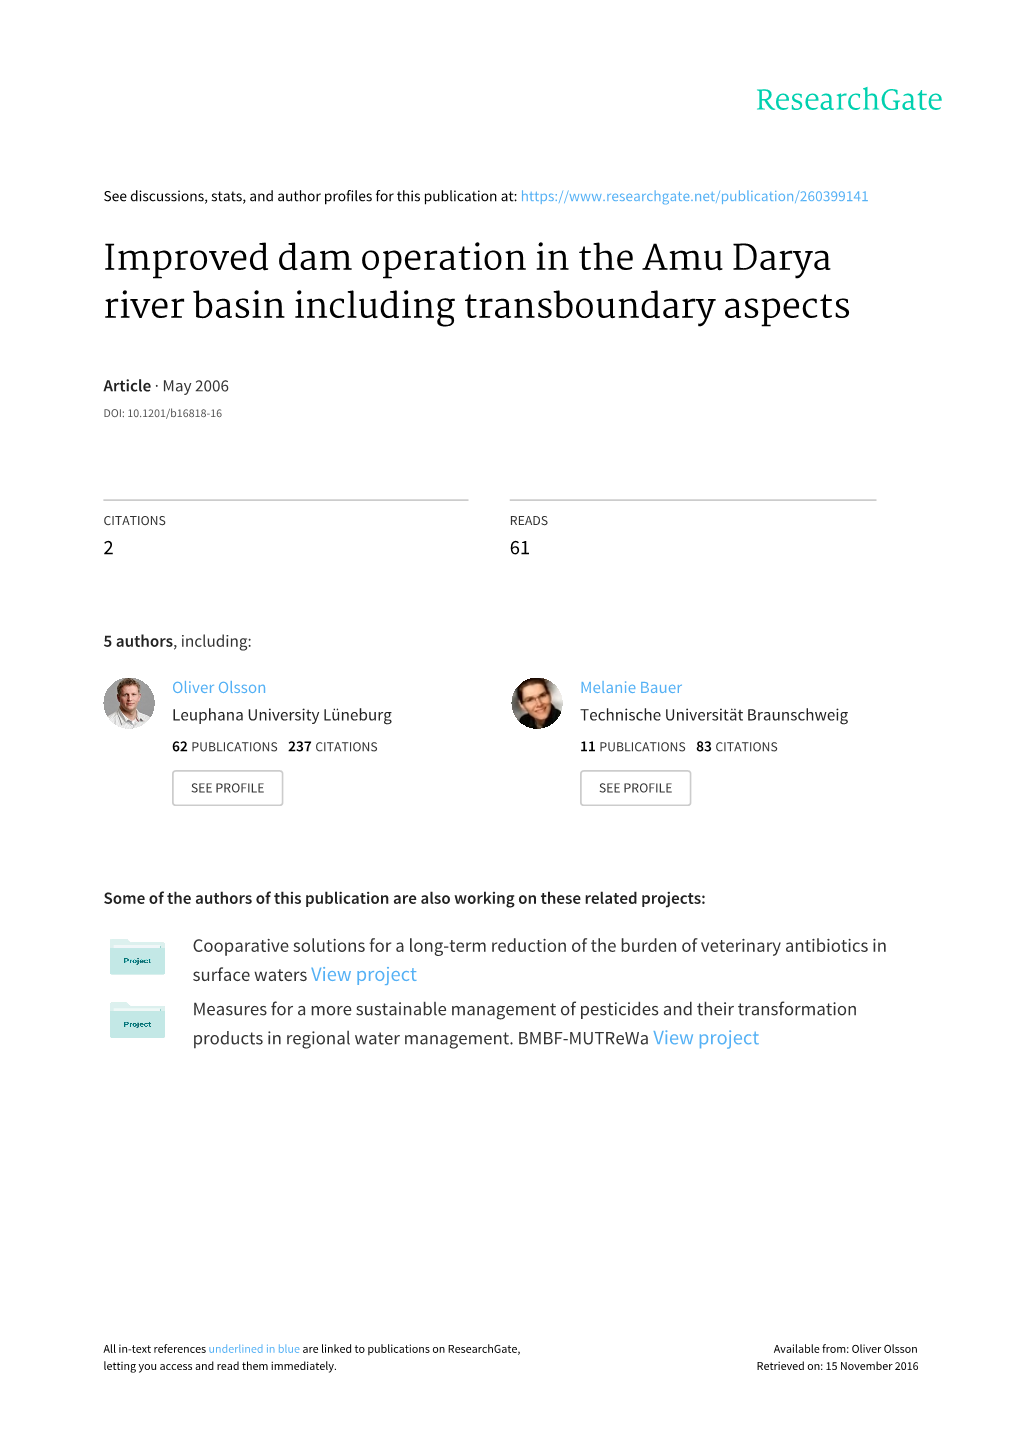 Improved Dam Operation in the Amu Darya River Basin Including Transboundary Aspects